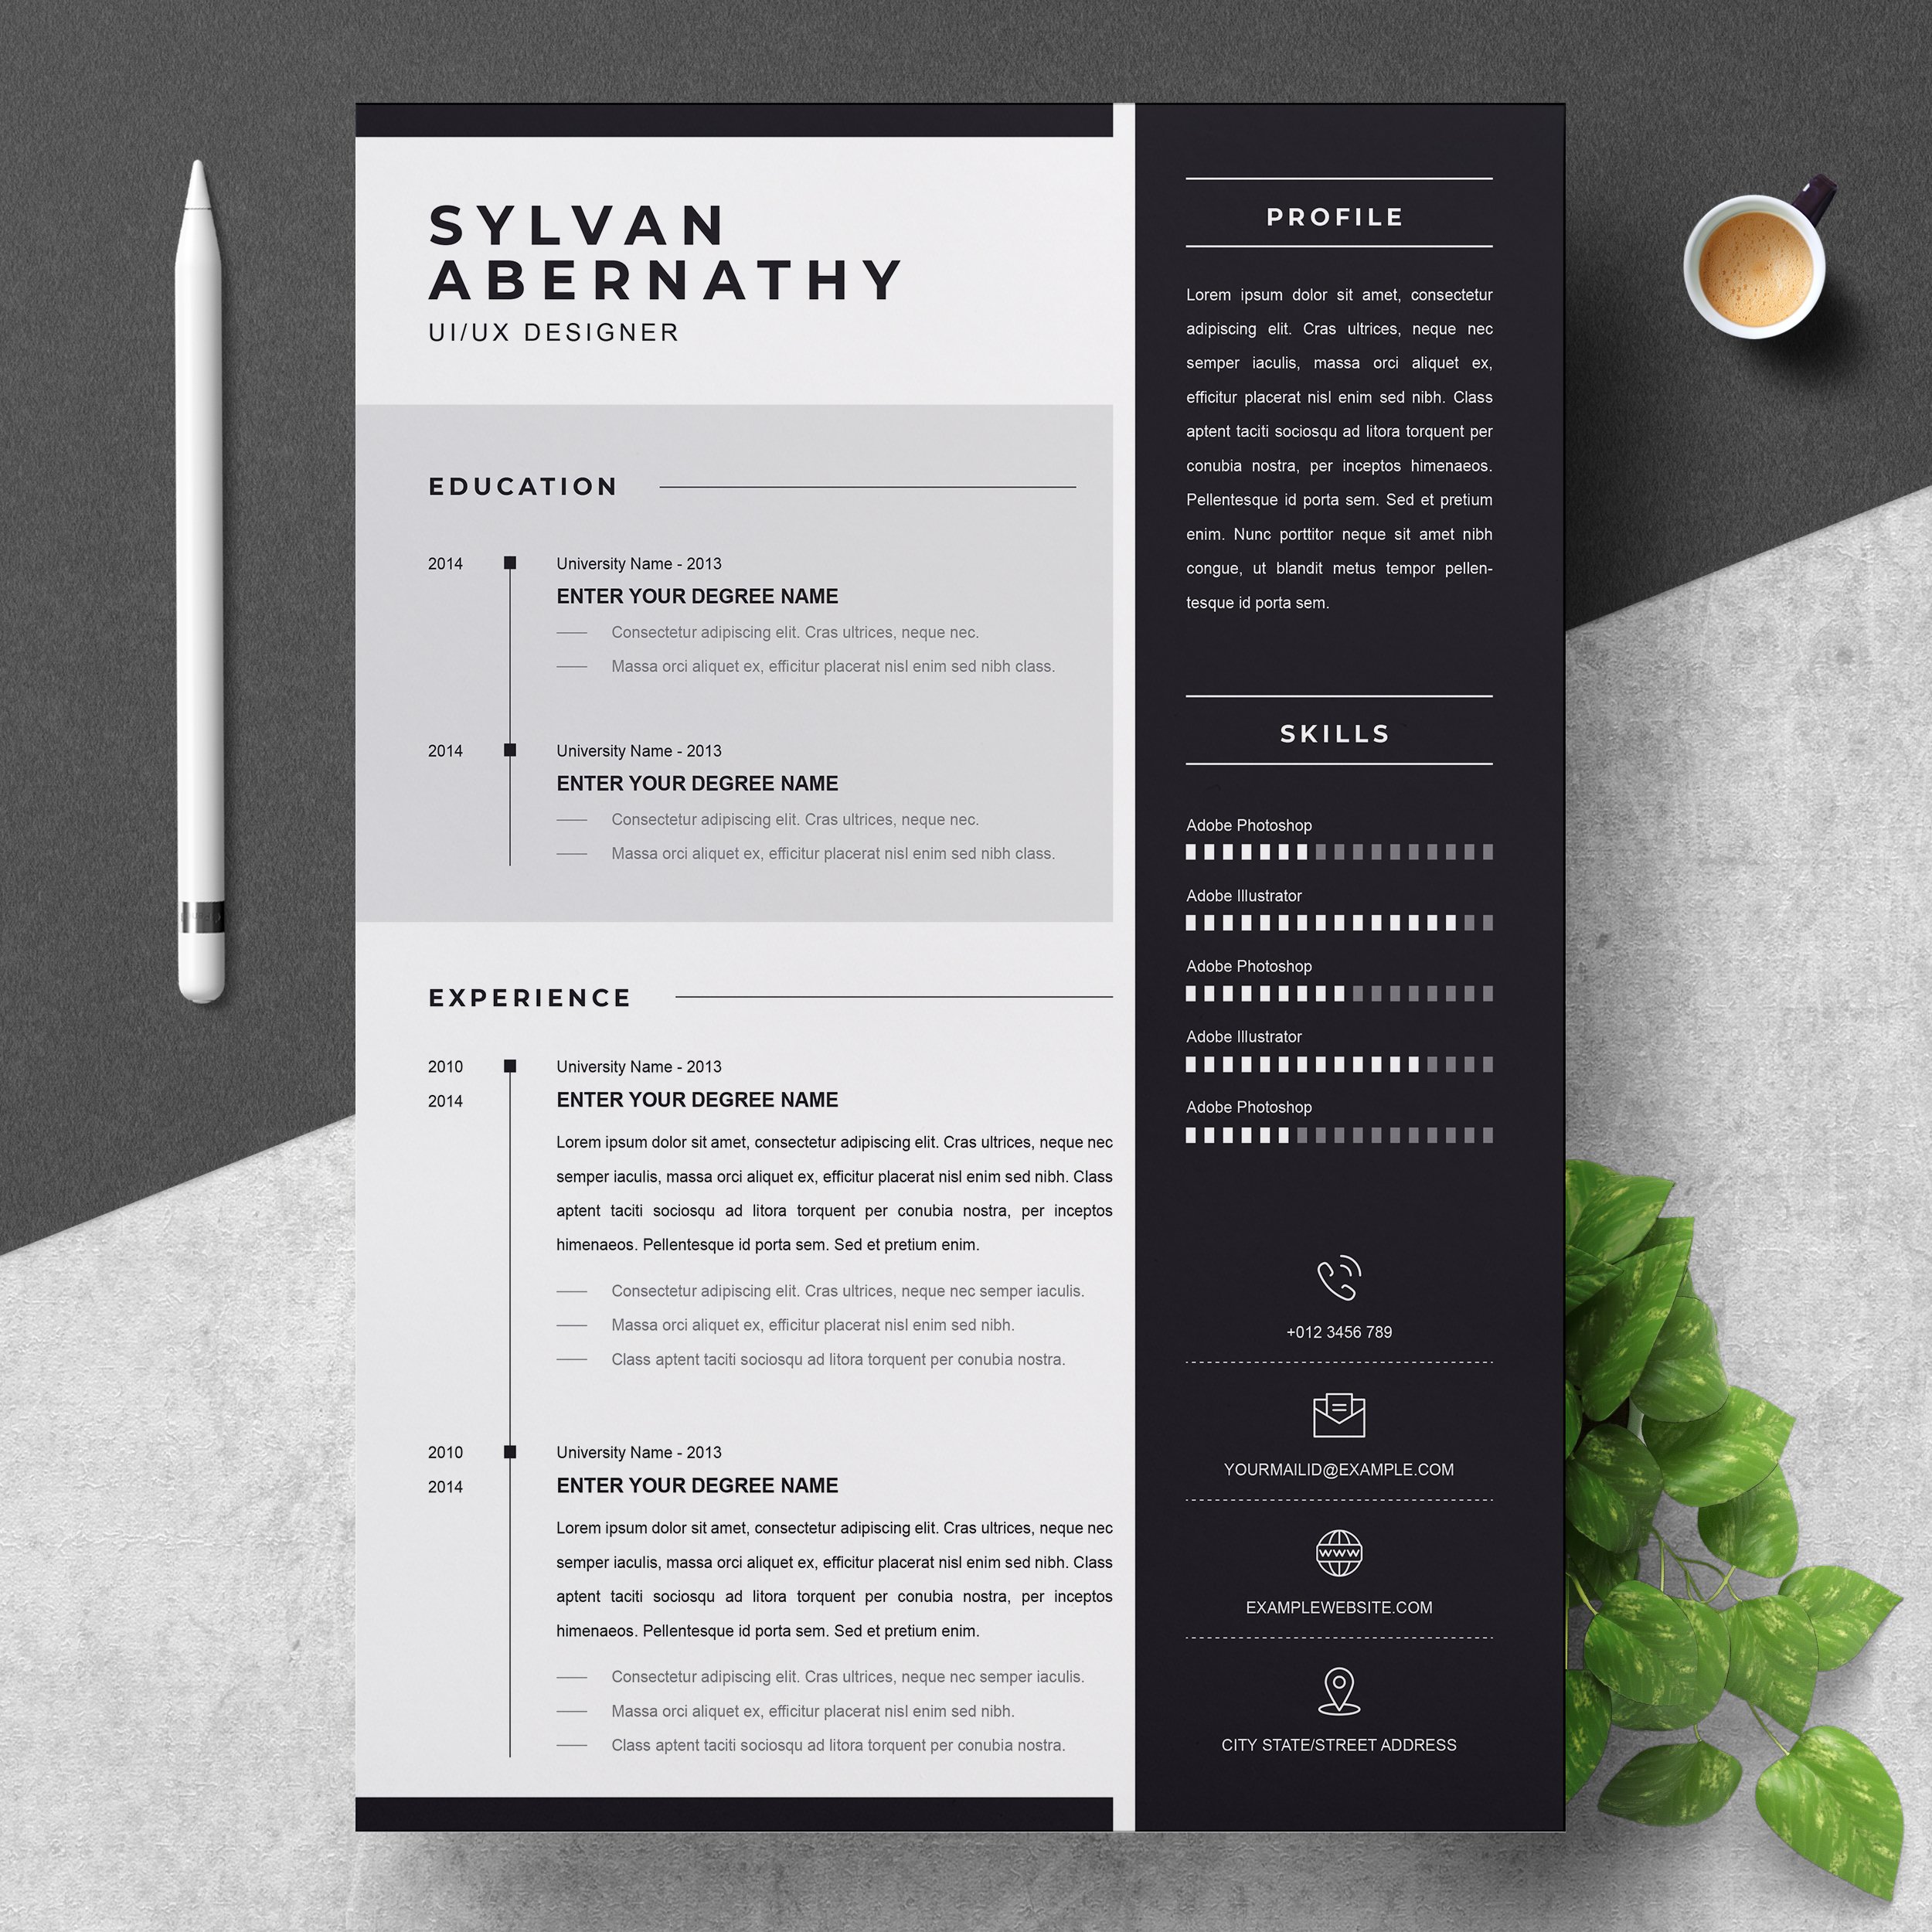 Professional Resume / CV Template cover image.